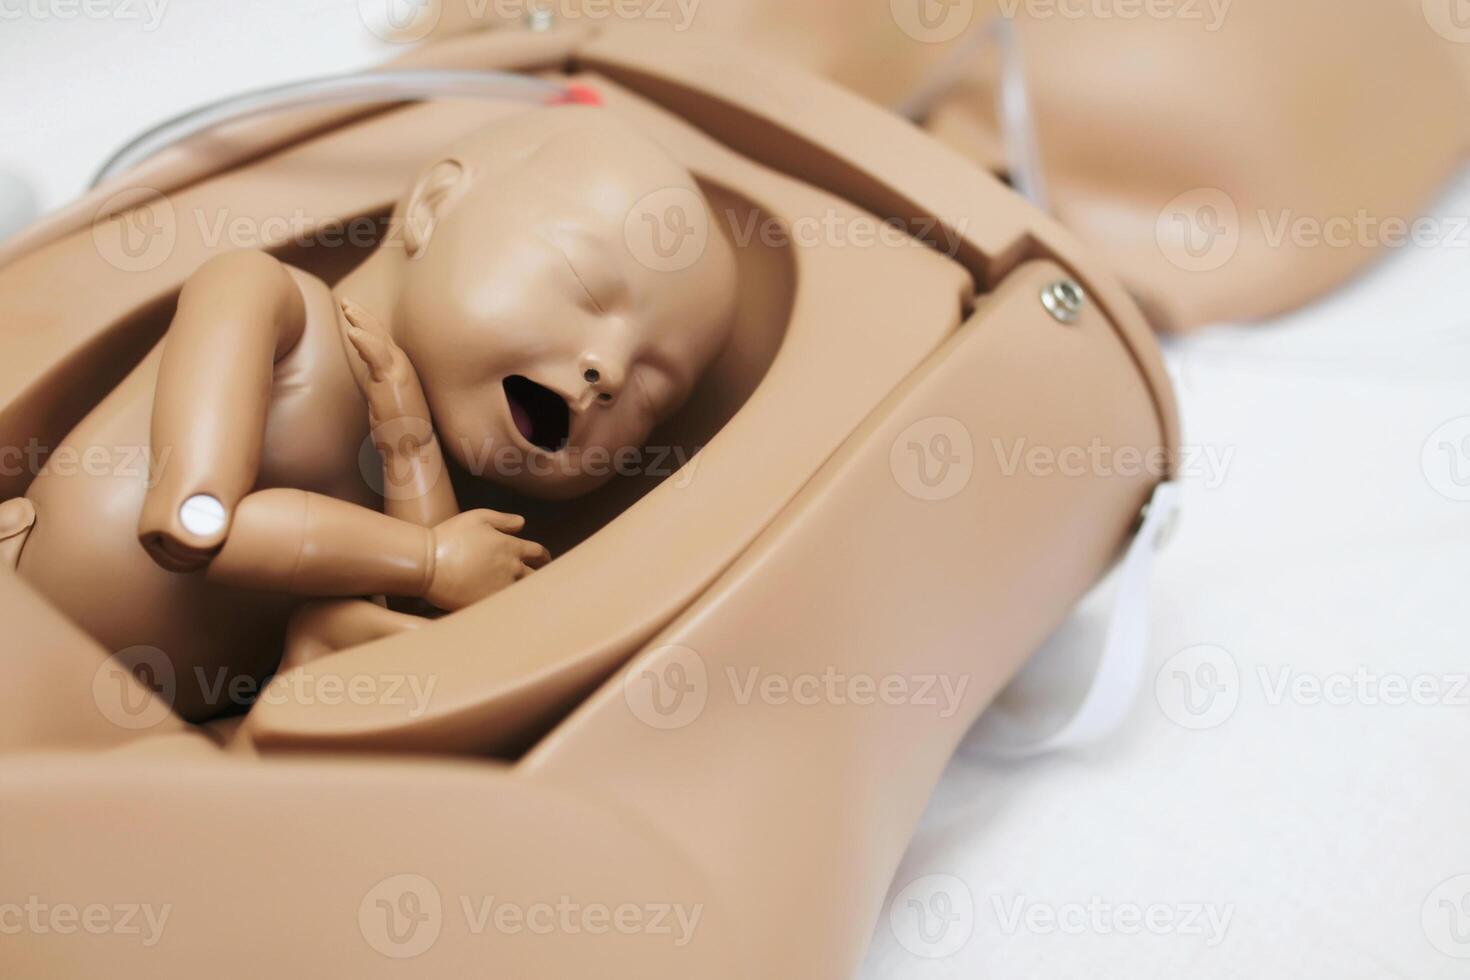 Dummy baby's embryo mother's womb, practical study and preliminary treatment. Medetsinskaya doll newborn lung disease. photo